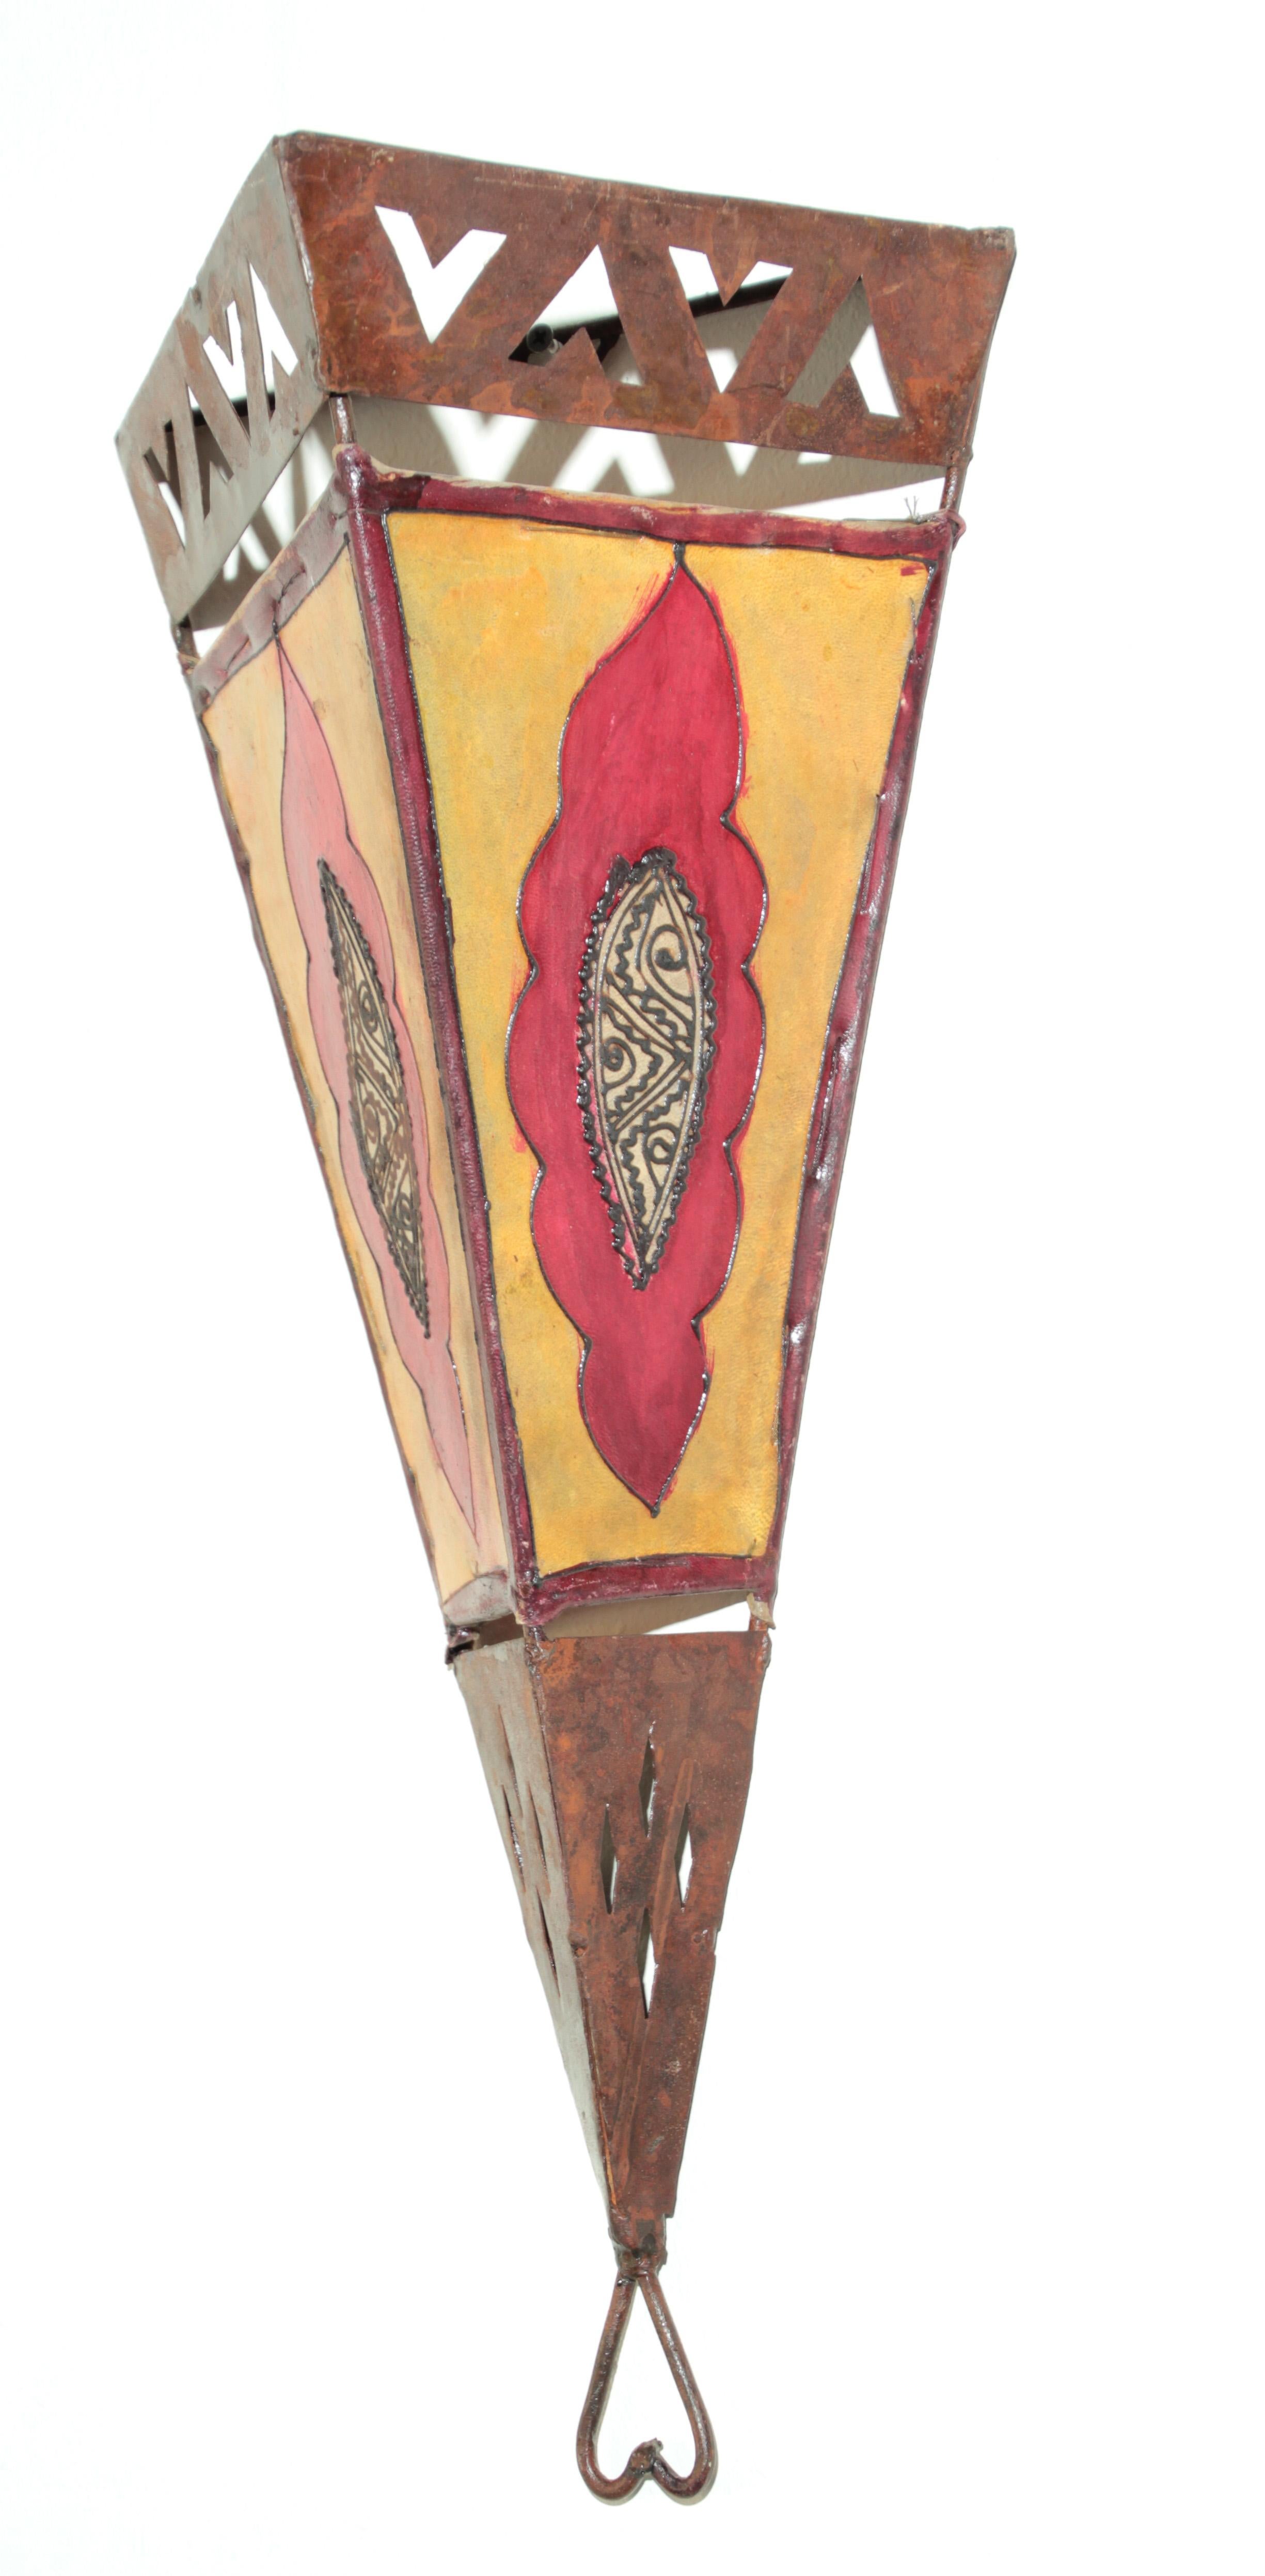 Large African Tribal Art parchment wall shade sconce featuring a large triangle hide form stitched on iron and hand painted surface.
These vintage hand crafted Folk Art pieces could be used as wall lamp shade or just decorative wall Art.
Iron frame